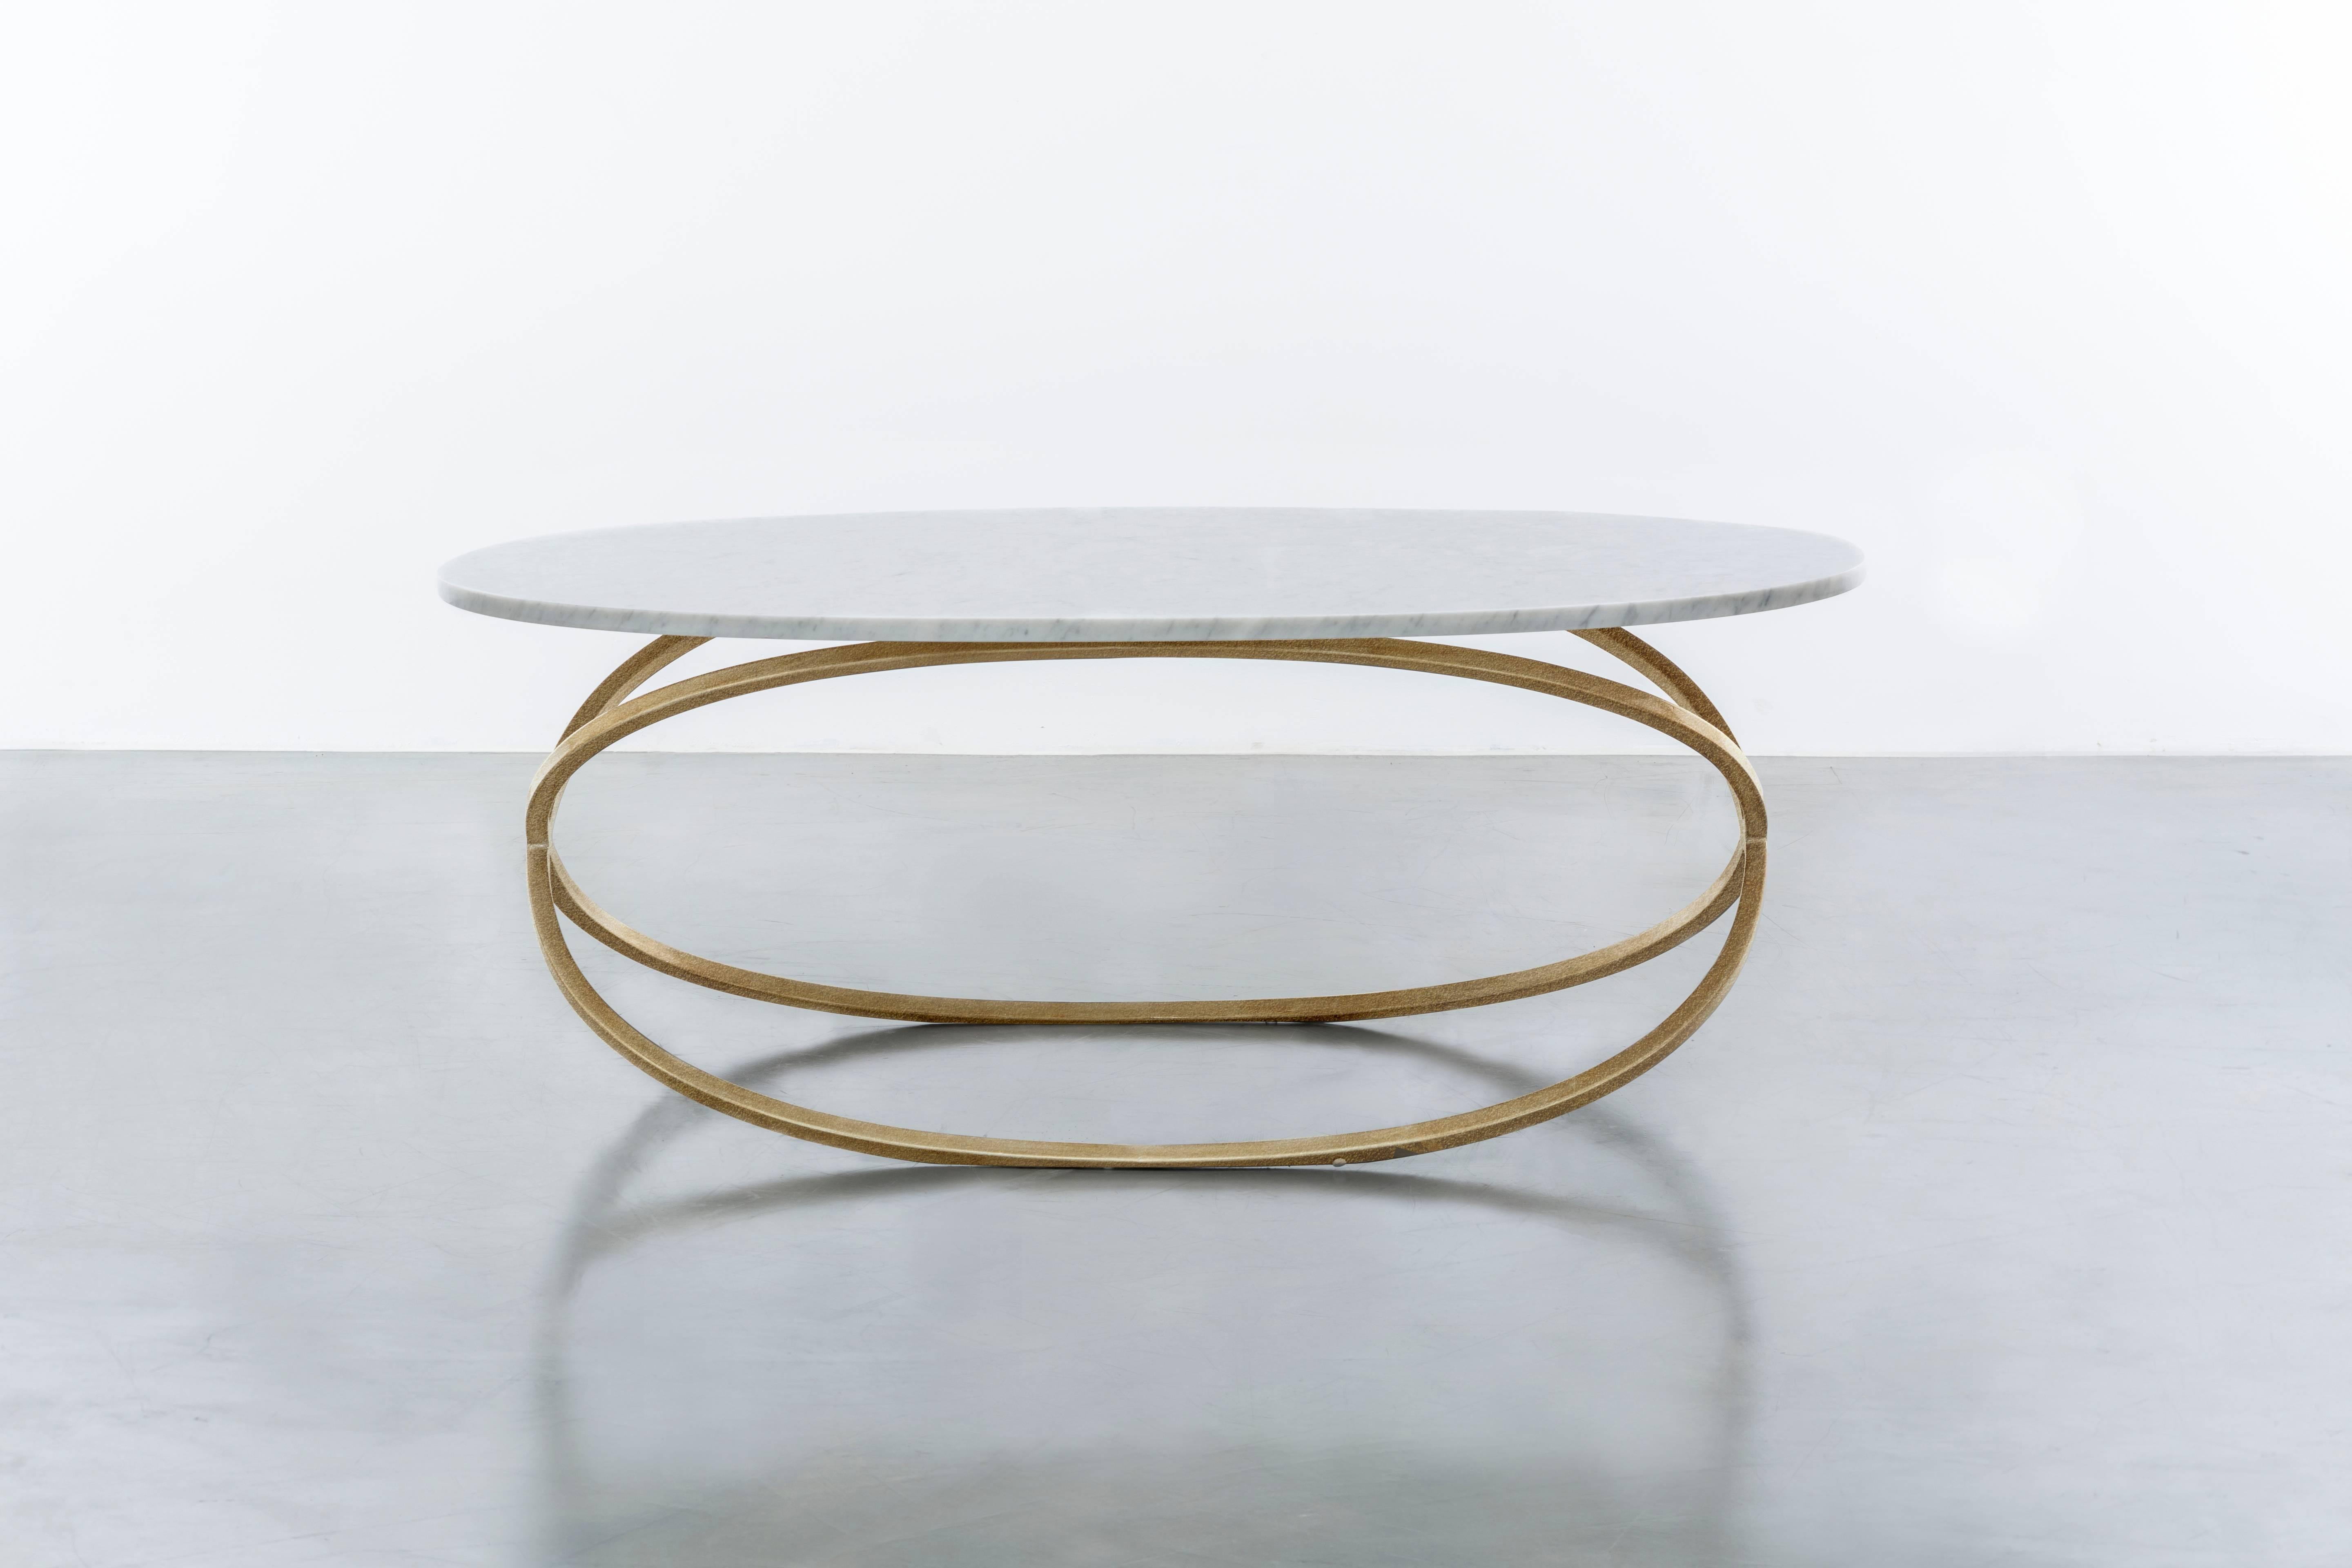 CHANTAL COFFEE TABLE - Modern Oval Cocktail Table with Carrara Marble In New Condition For Sale In Laguna Niguel, CA